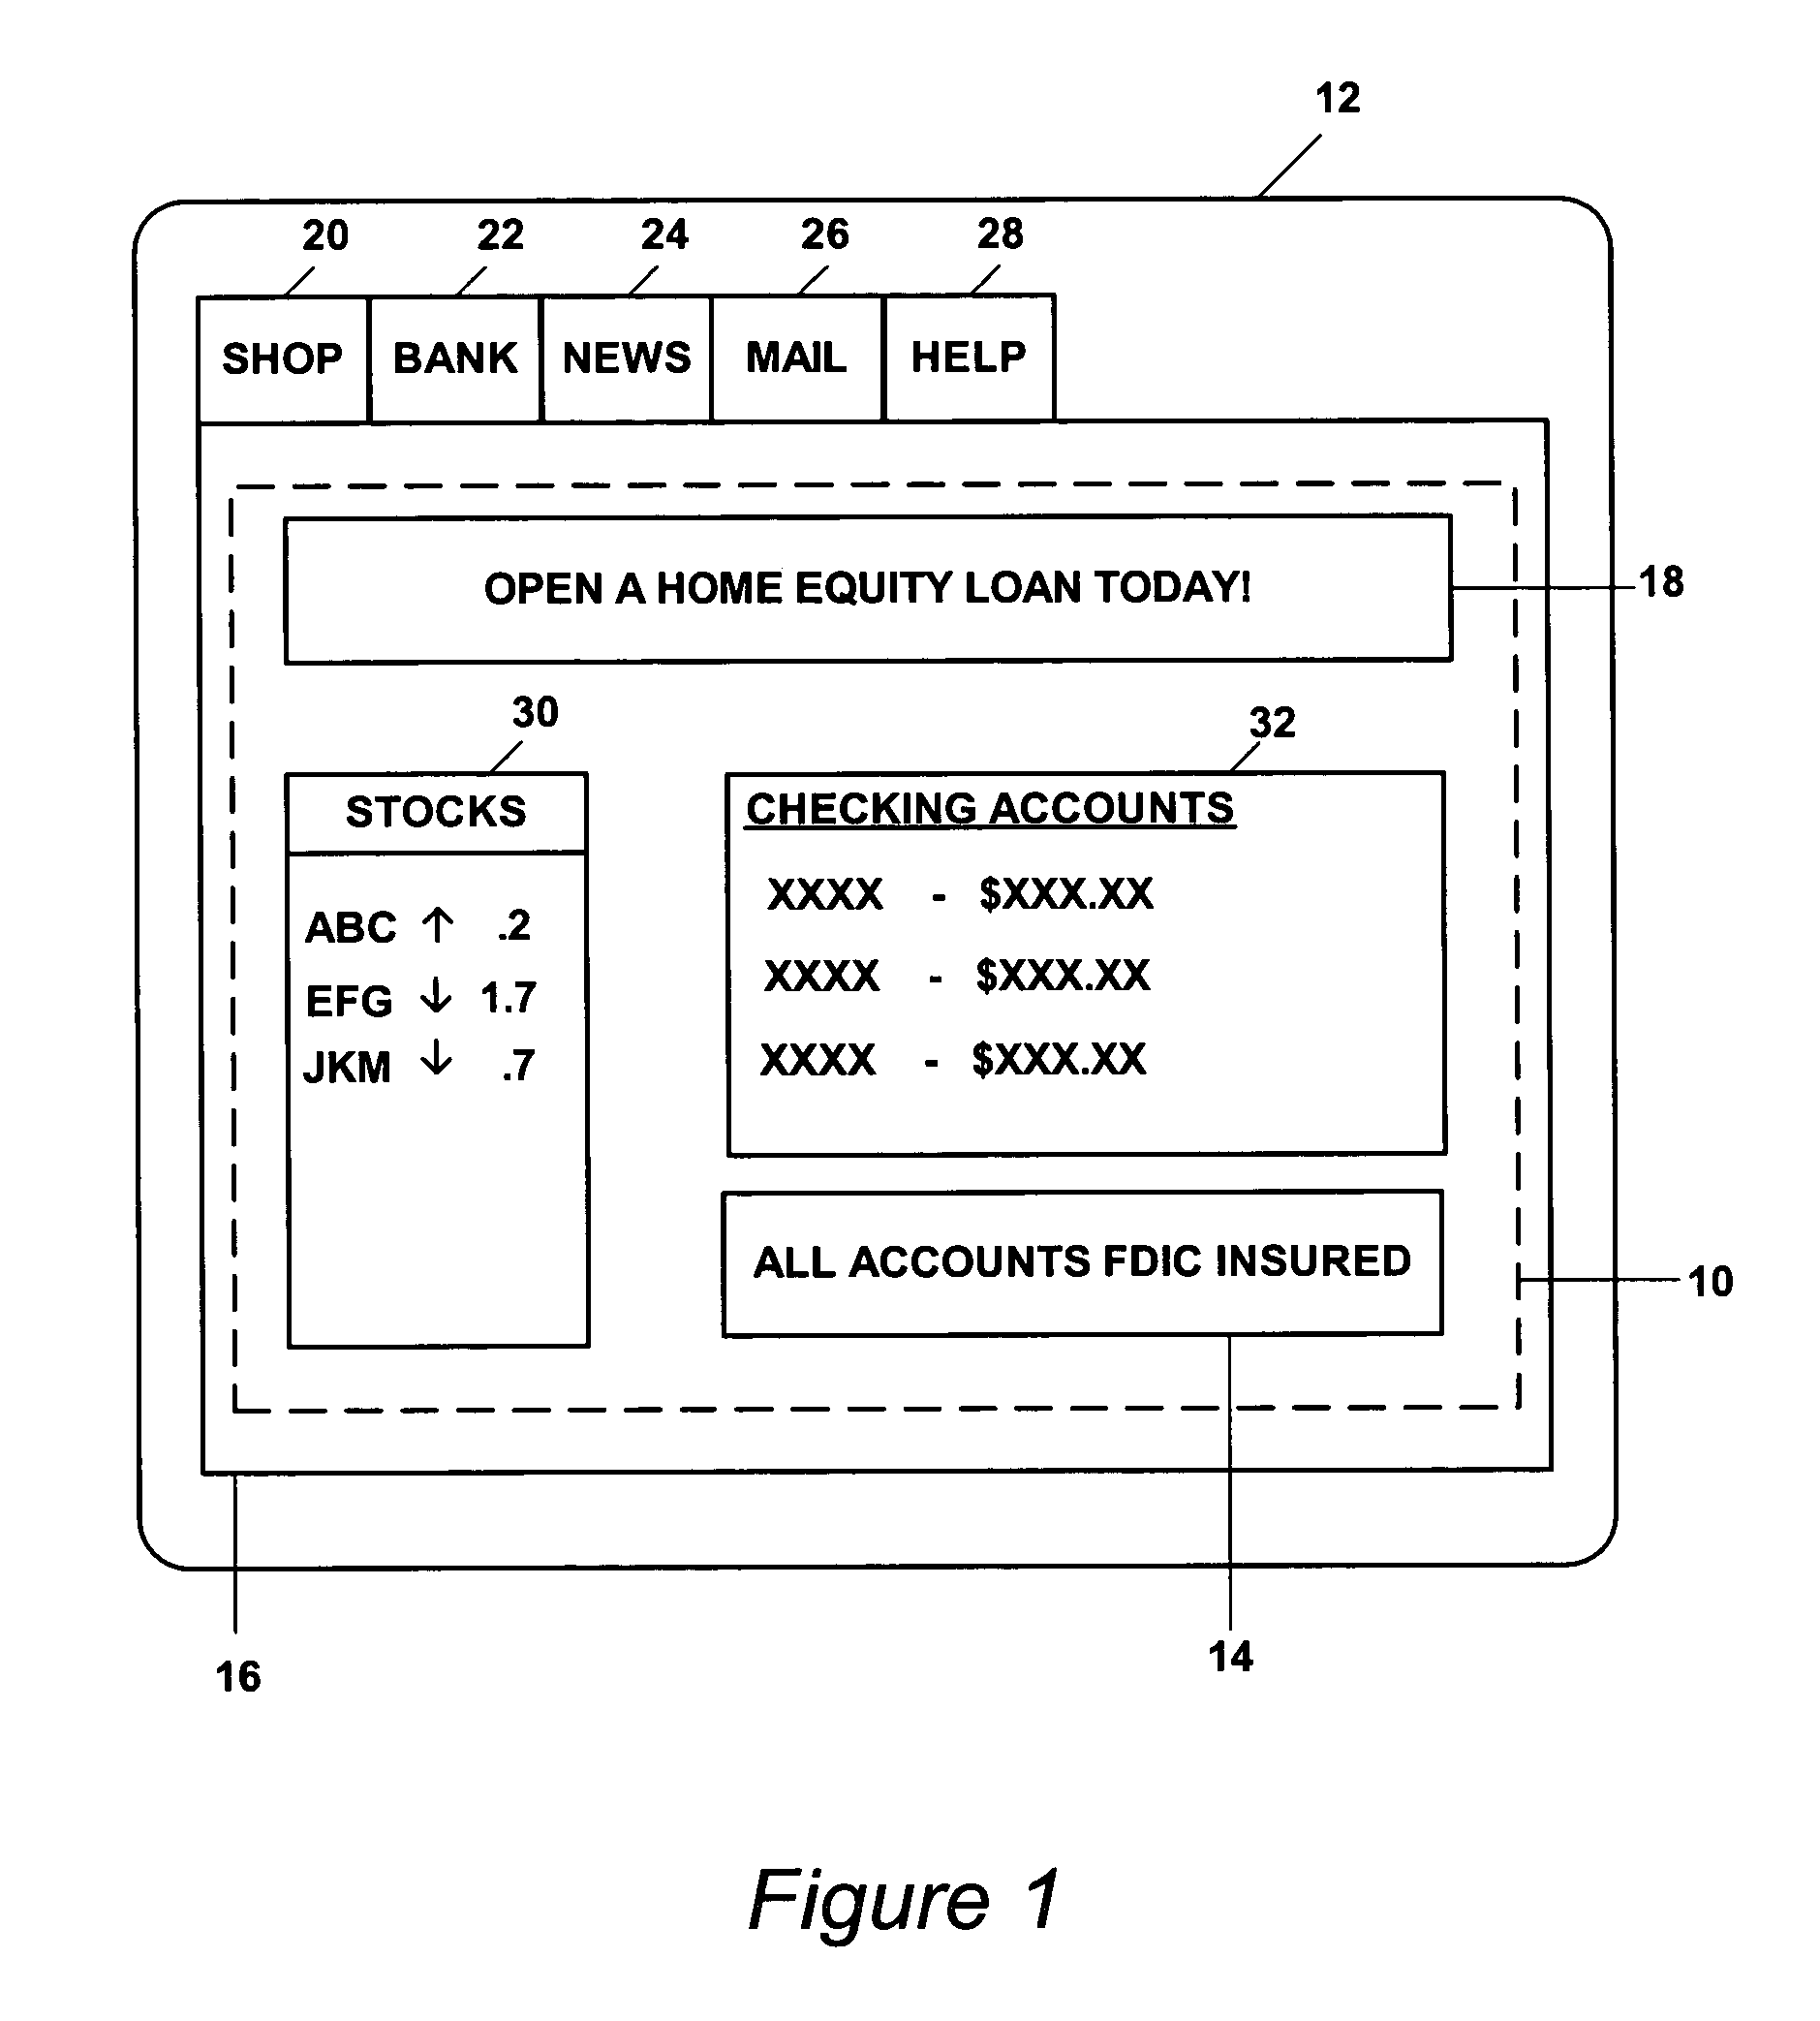 Method for entitling a user interface